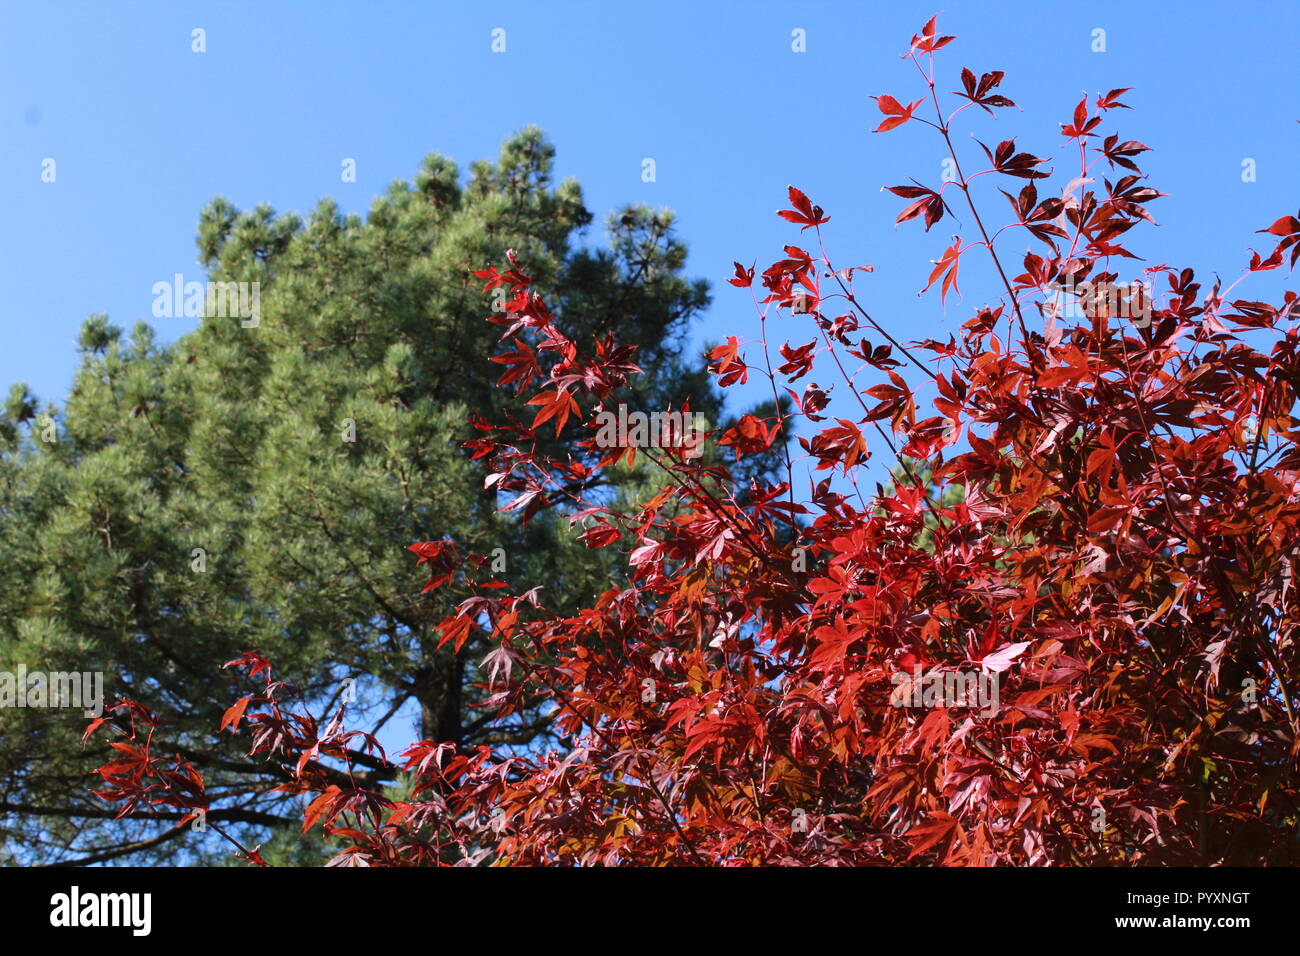 Autumnal trees with orange, red and green leaves Stock Photo